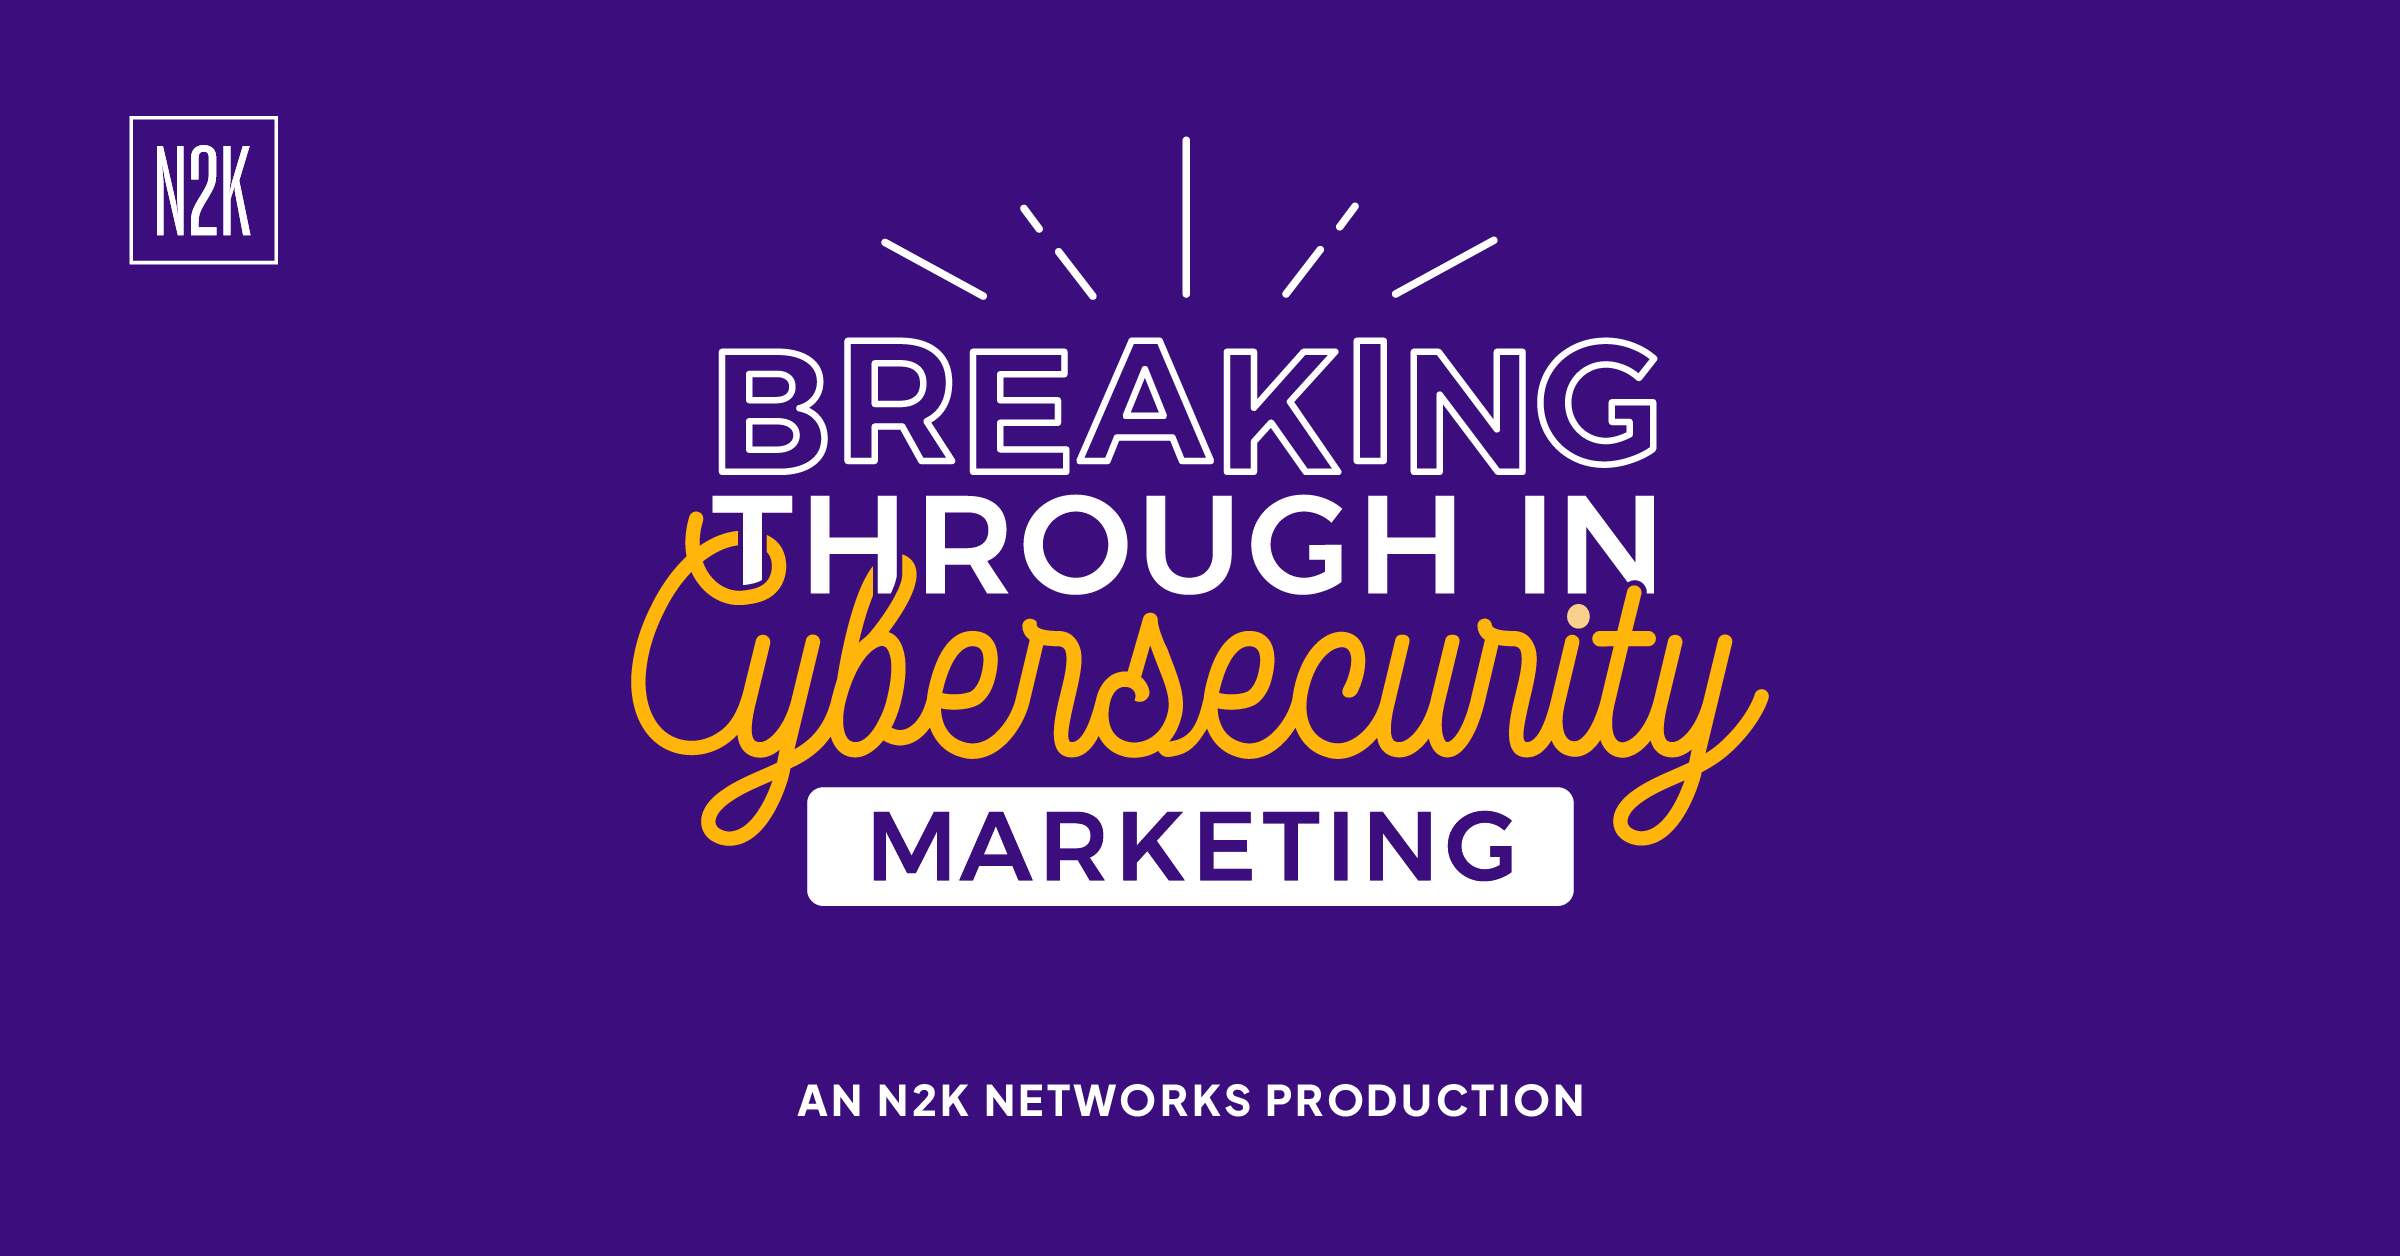 Cybersecurity Marketing Society’s Breaking Through in Cybersecurity Marketing podcast joins N2K’s CyberWire Podcast Network.